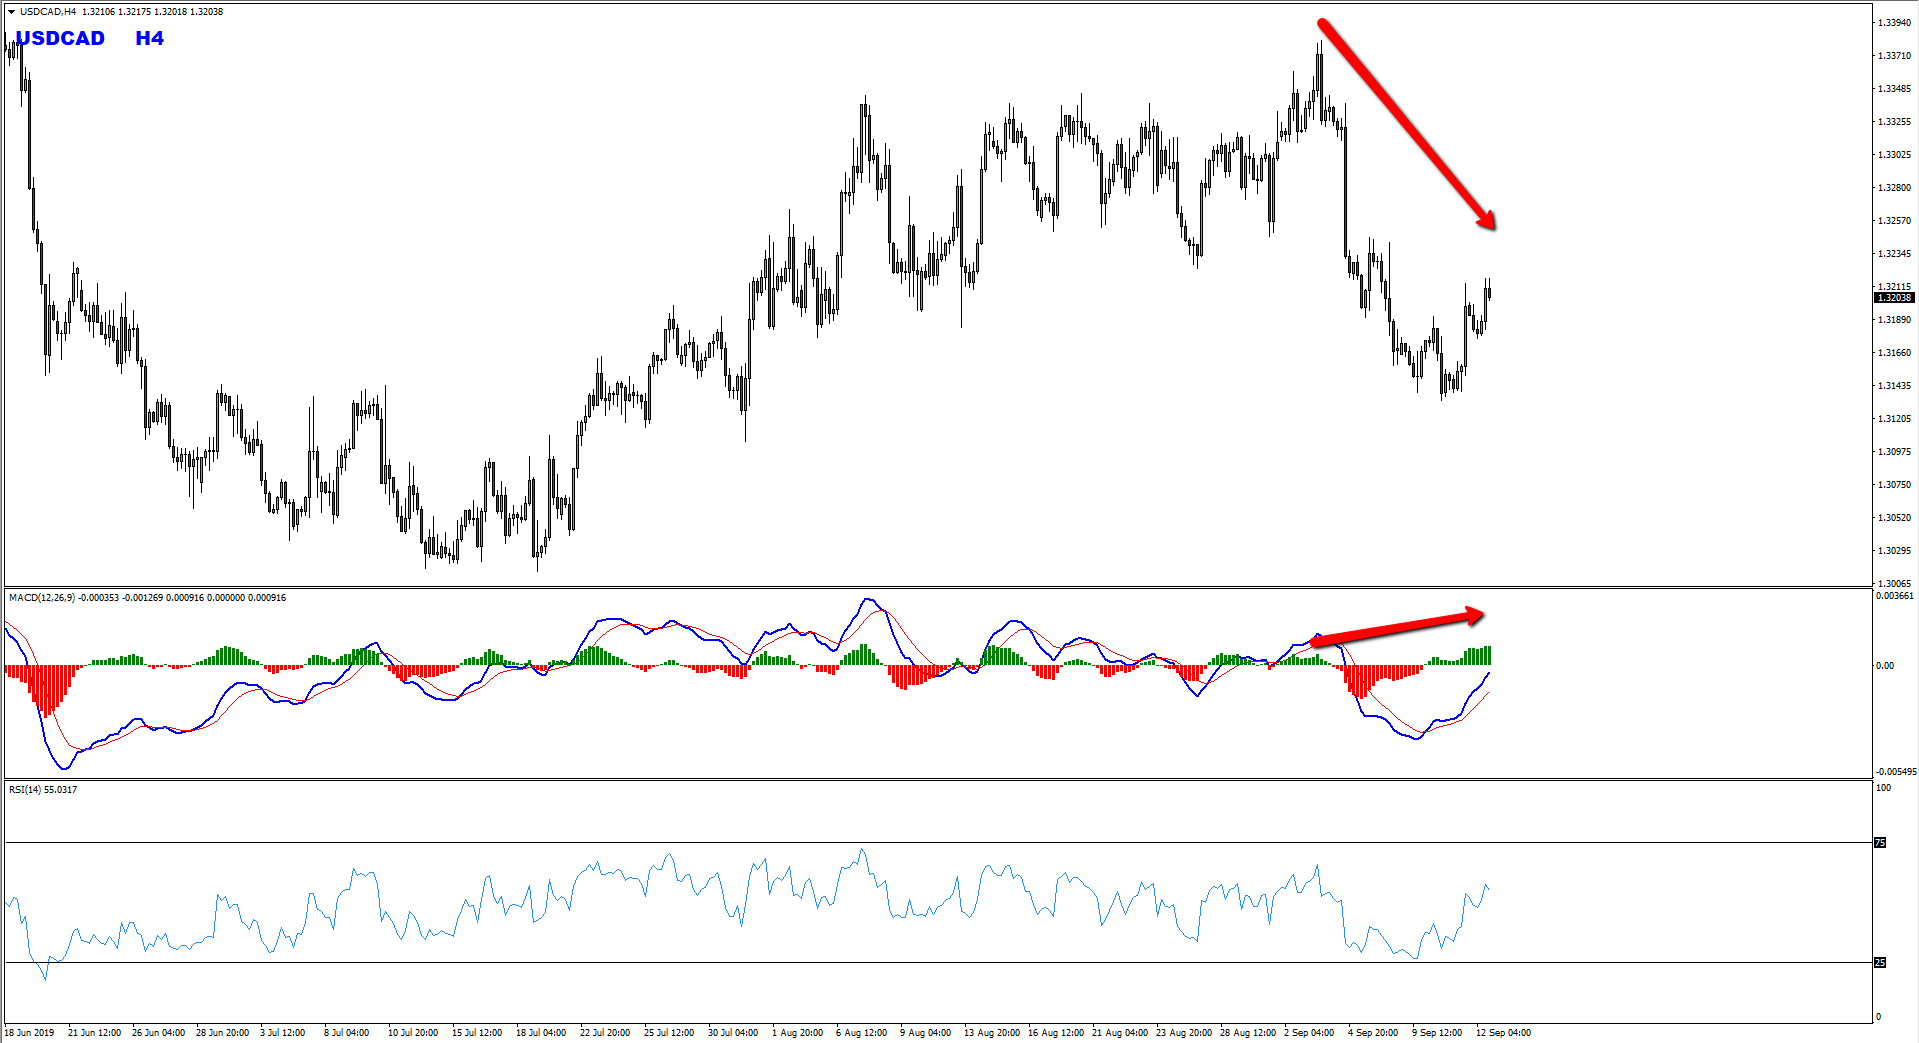 USDCAD Sell Structure Forming At The Moment